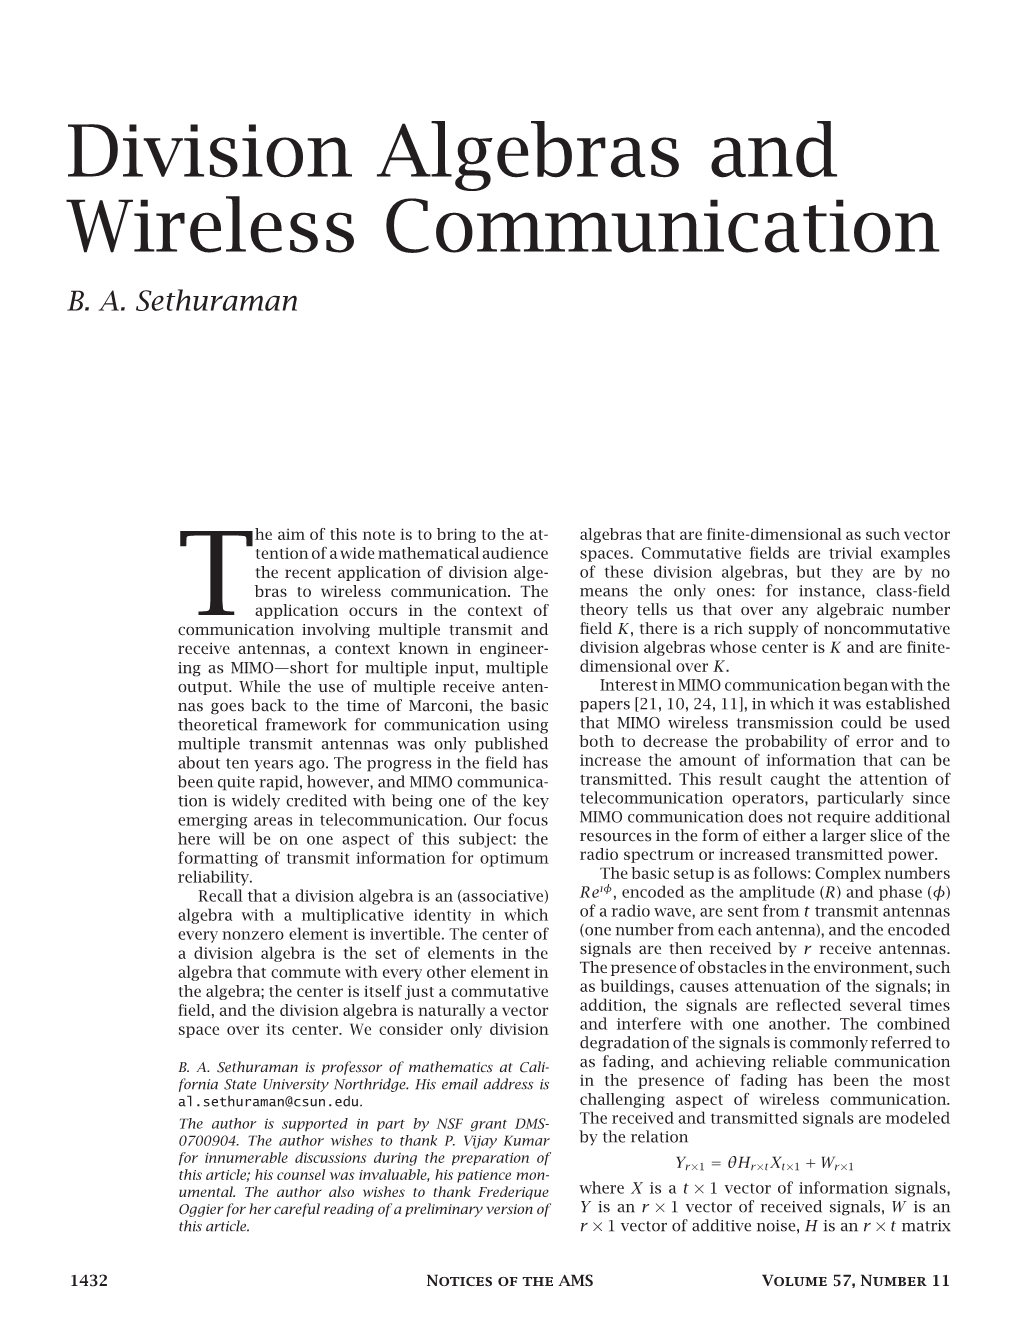 Division Algebras and Wireless Communication B